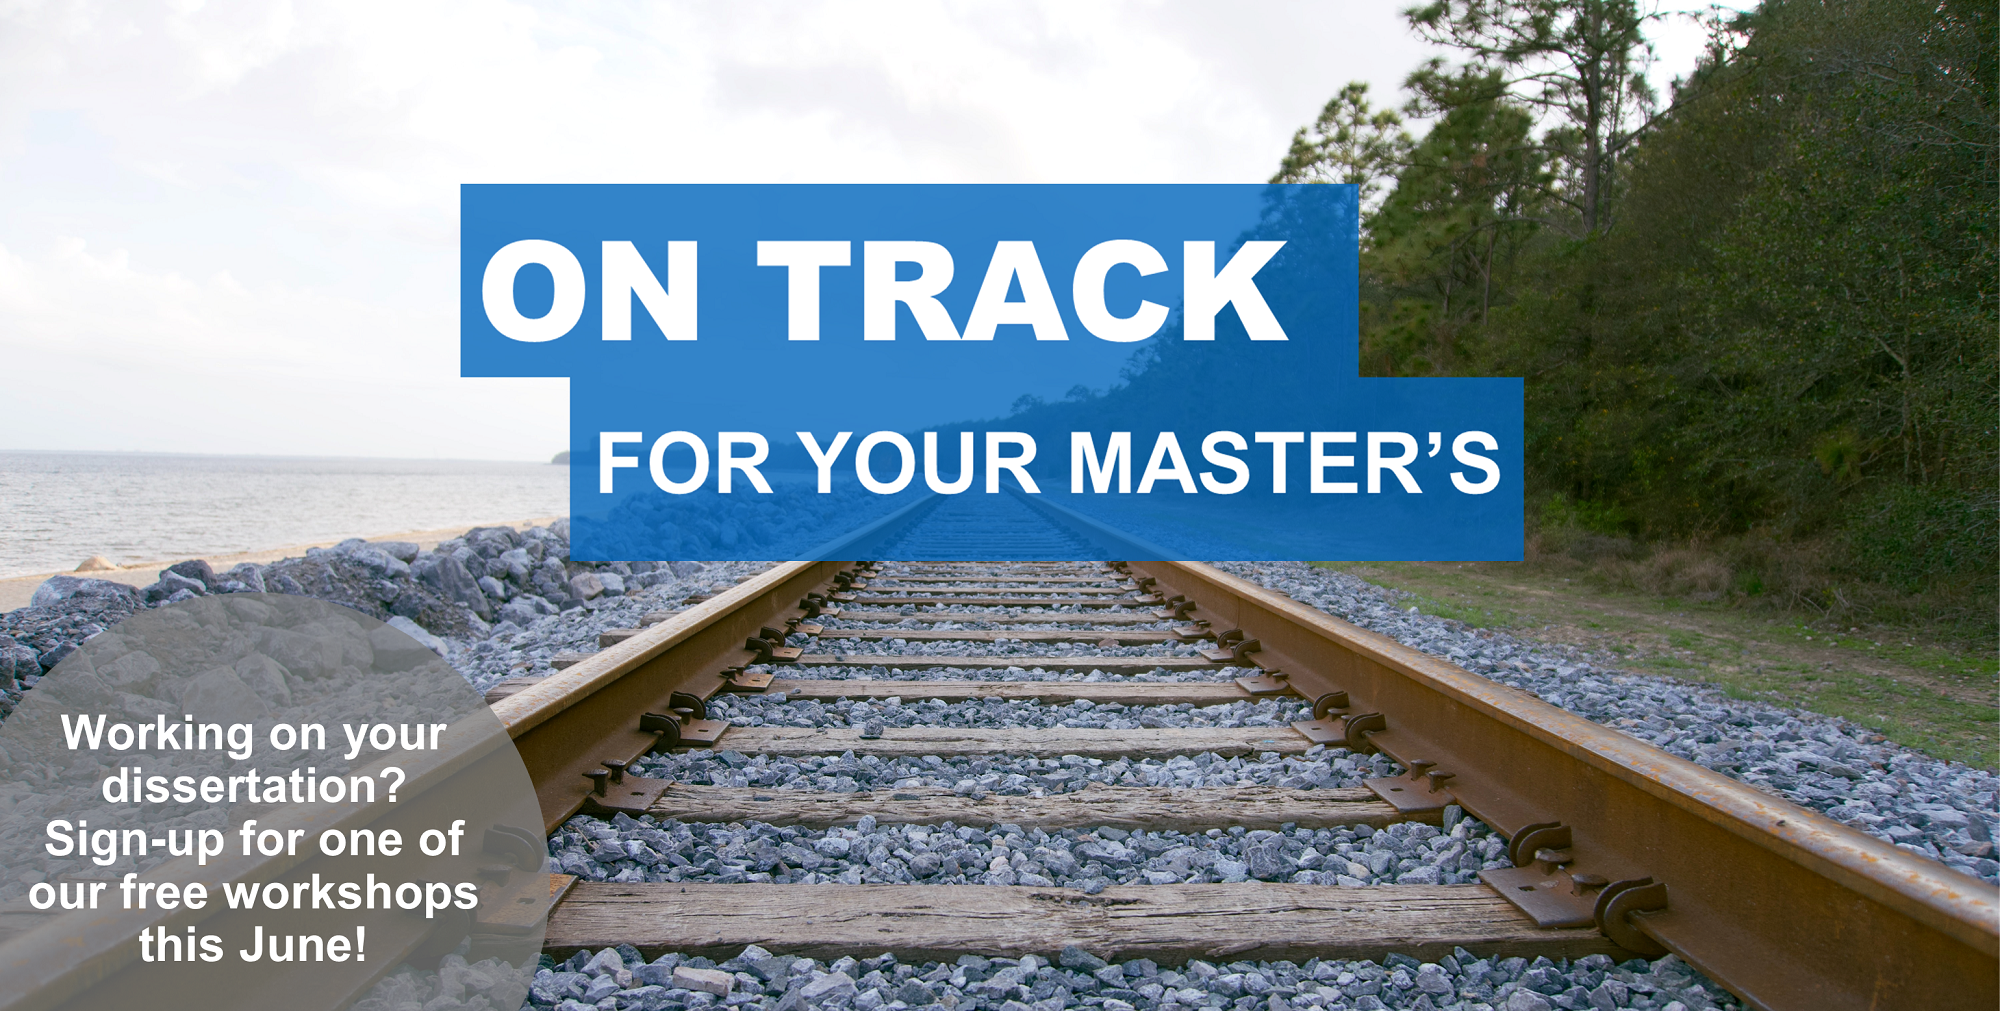 Wooden train tracks running over blue/grey stones to the horizon with green trees and bushes to the right and small body of water, like a lake, to the left. Copy overlaid reads: "On Track for your Master's, Working on your dissertations? Sign-up for one of our free workshops this June!".